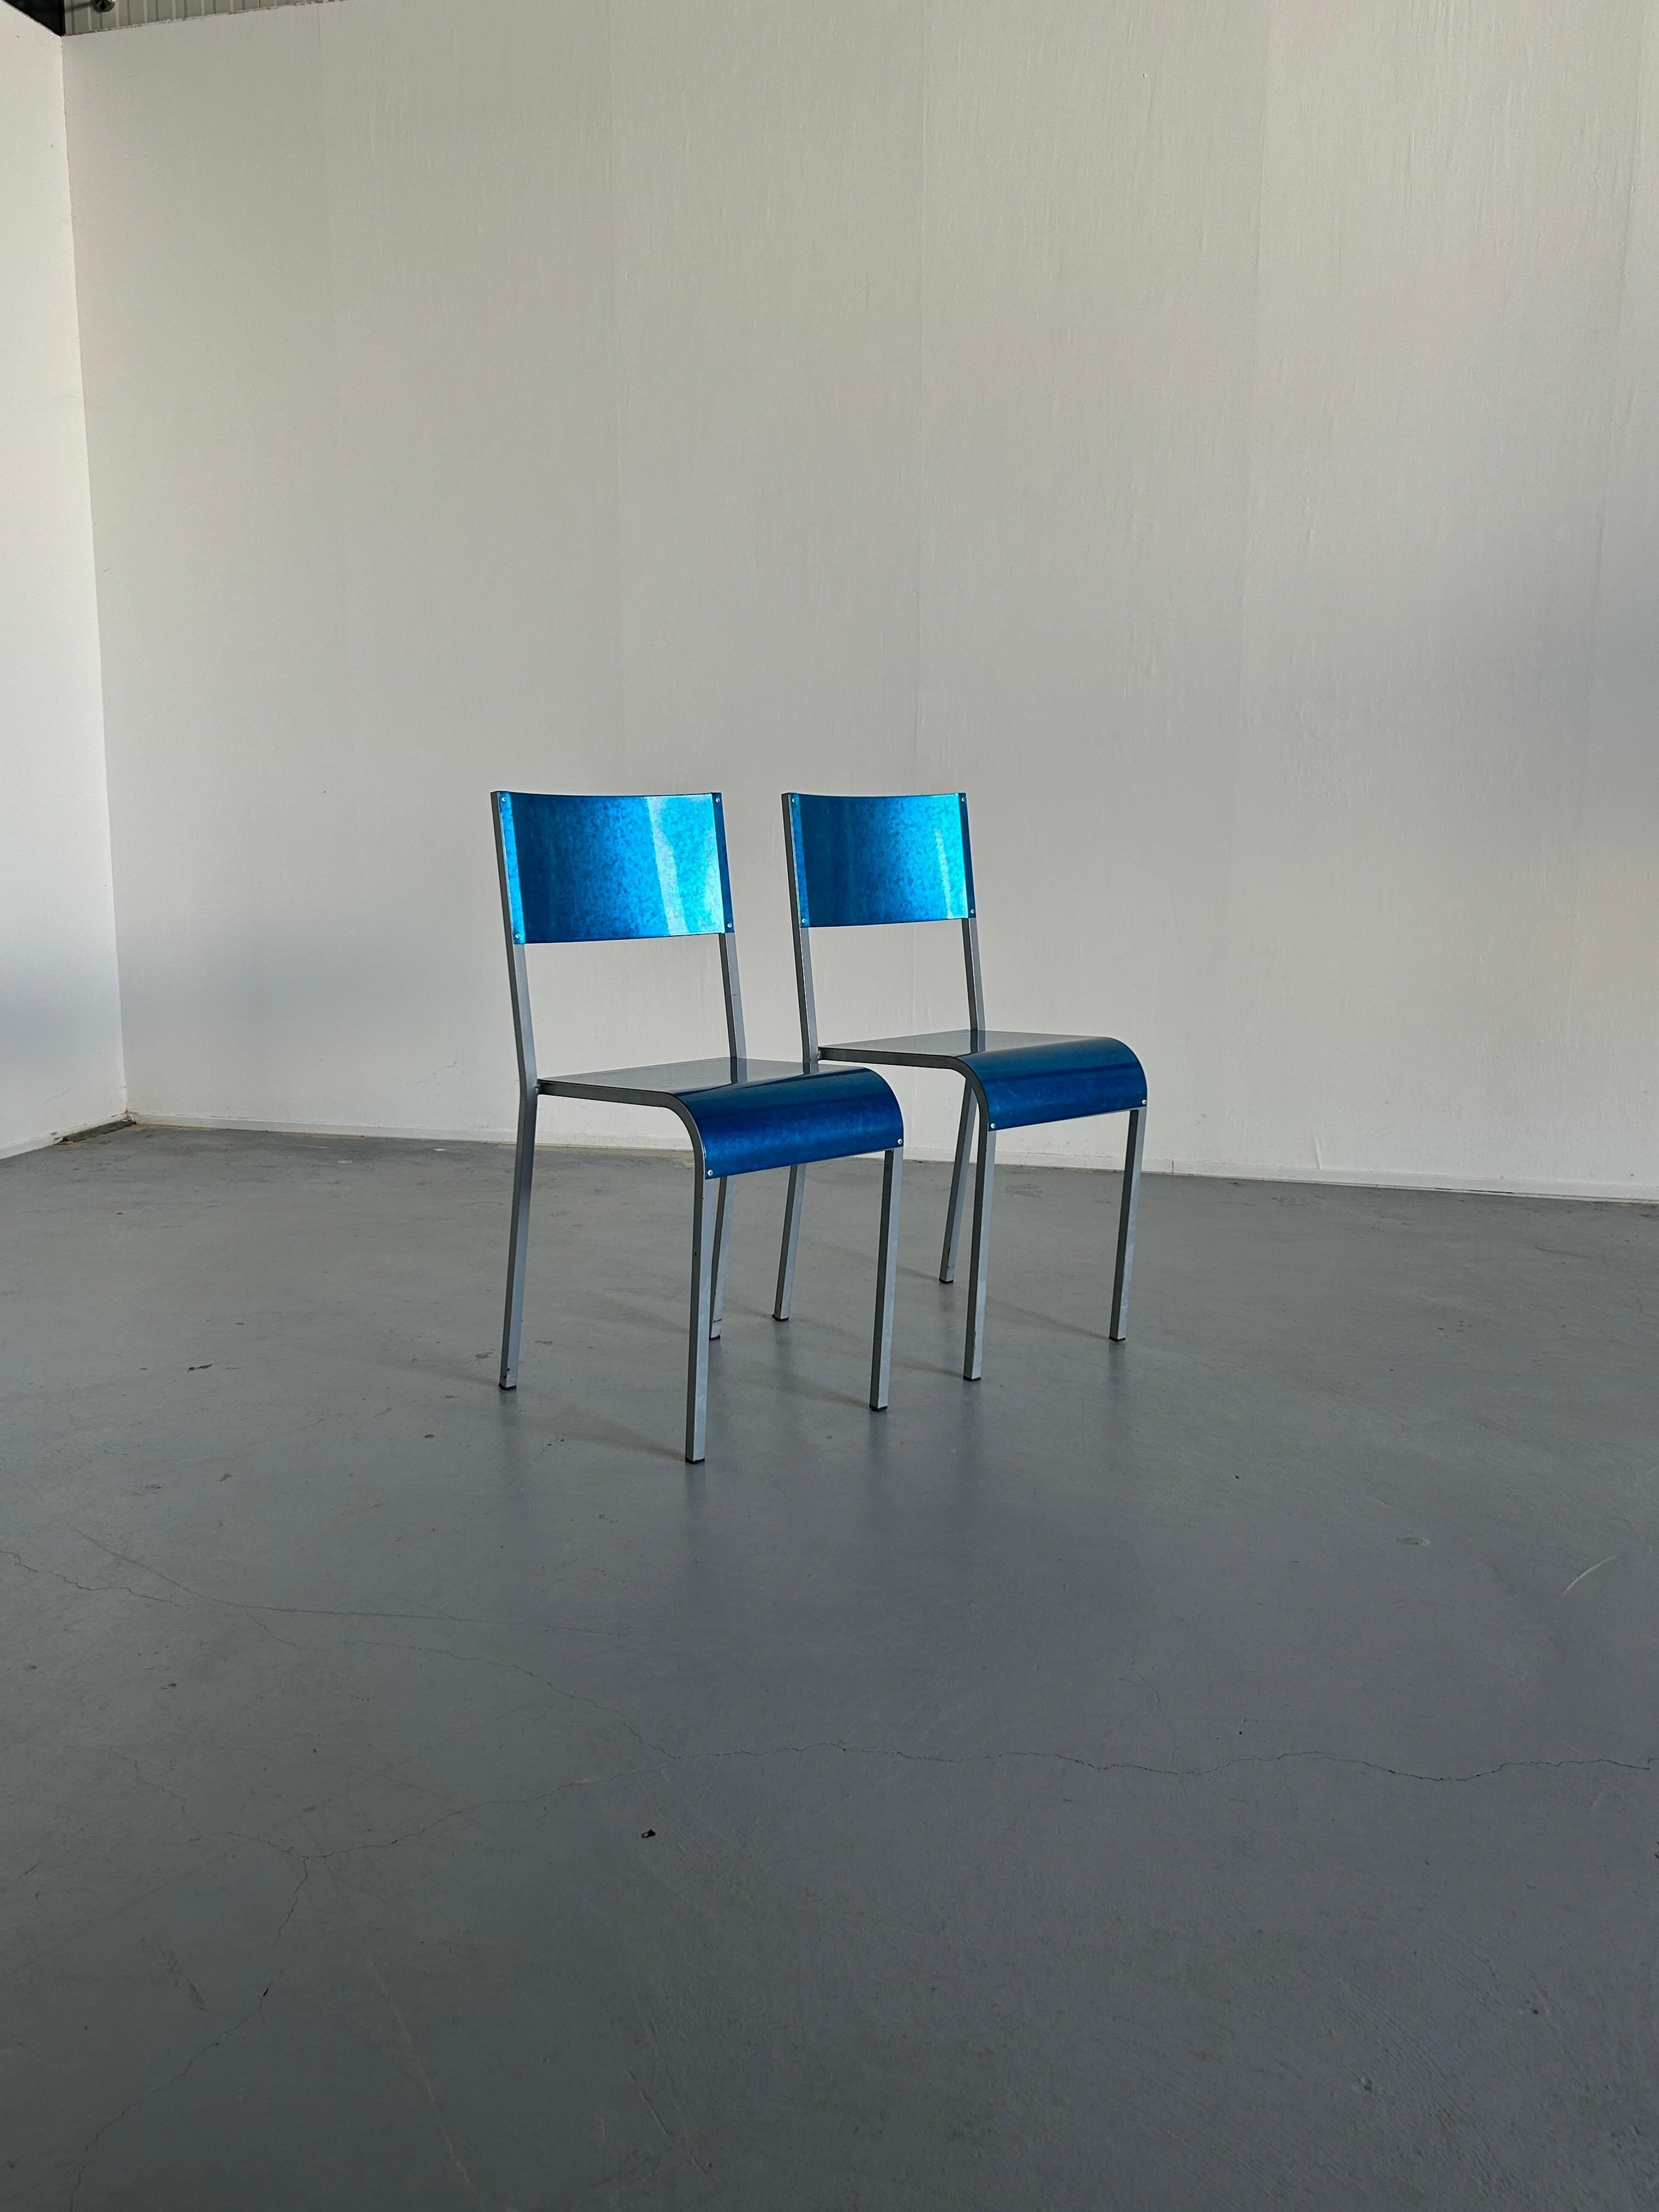 Italian Pair of Blue Postmodern Industrial Metal Dining Chairs by Parisotto, 1980s Italy For Sale